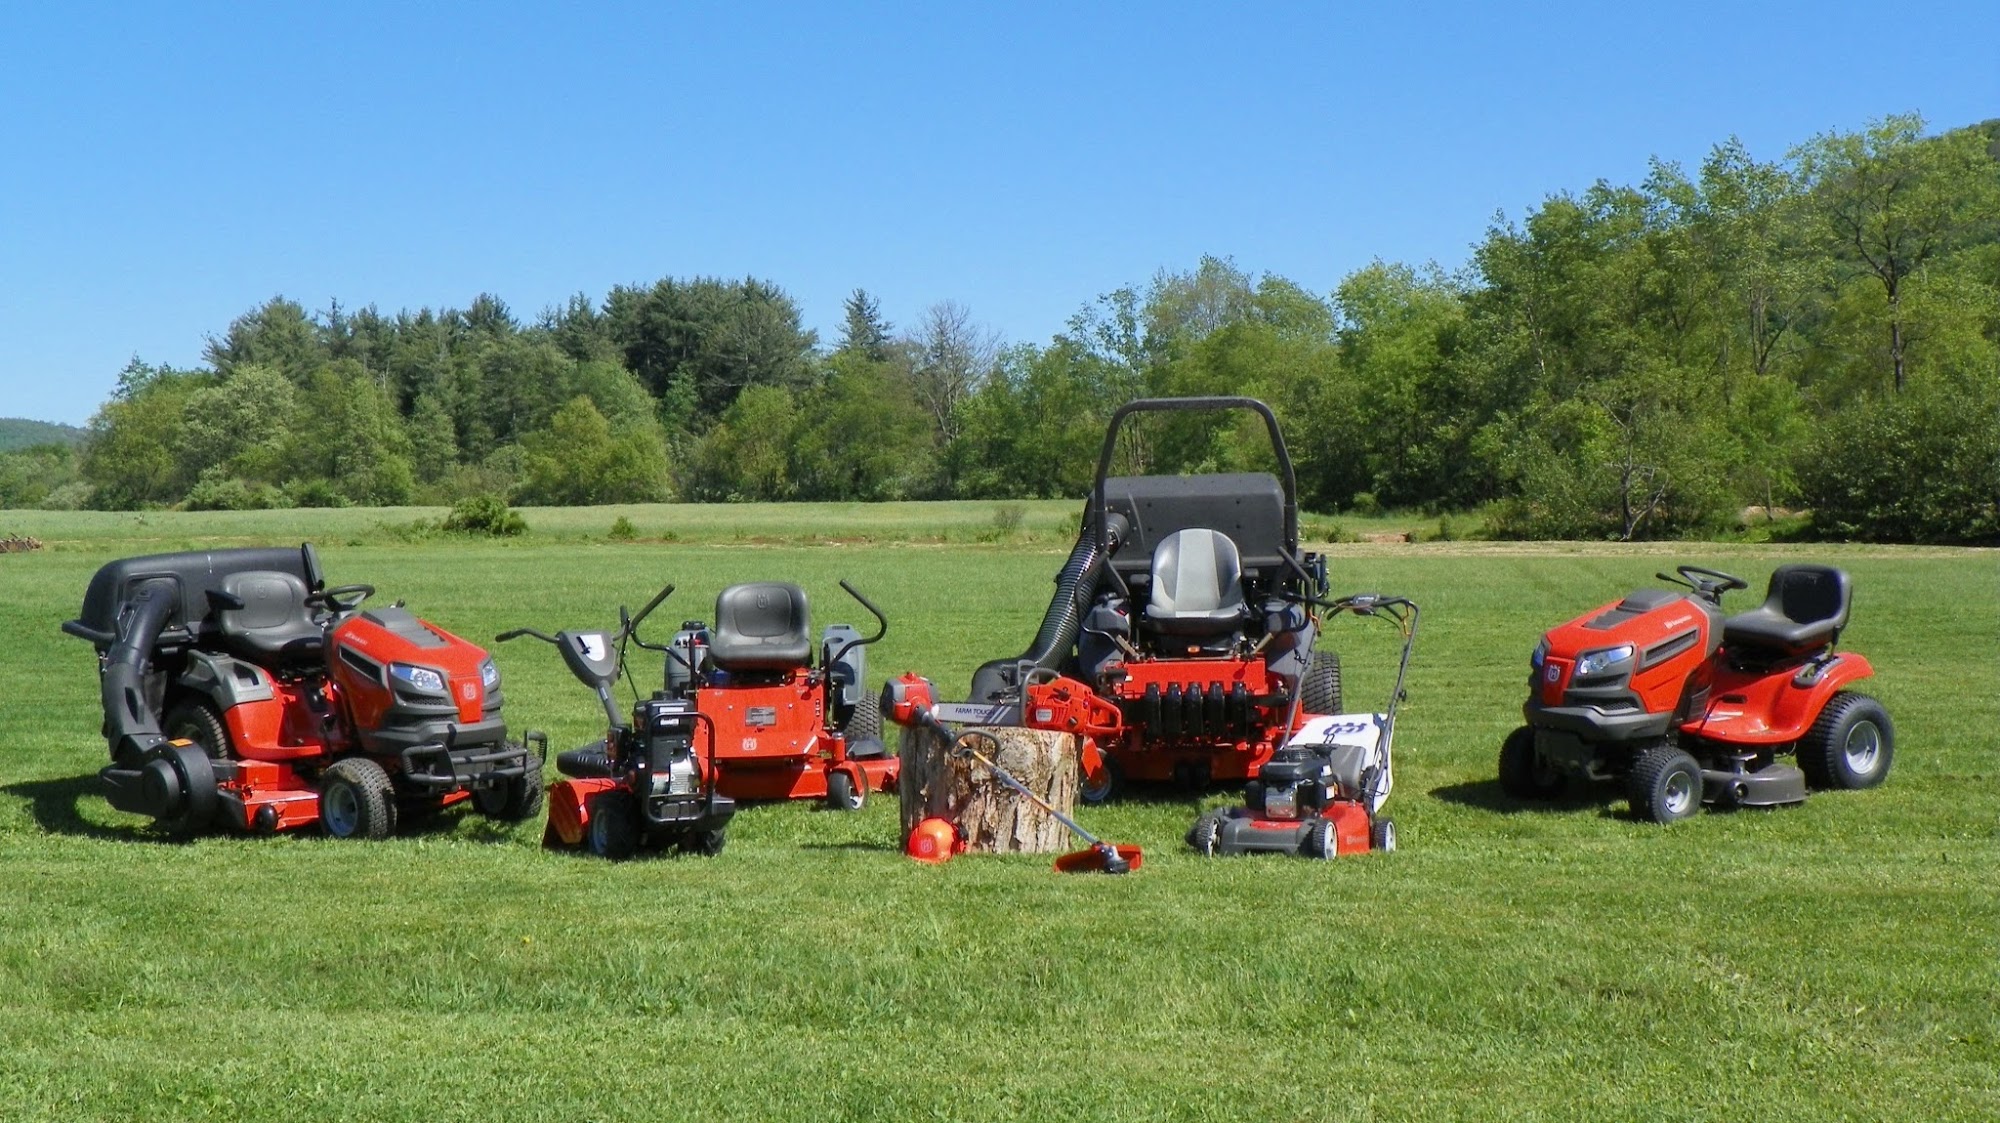 Canfield's Outdoor Power Equipment, Inc.